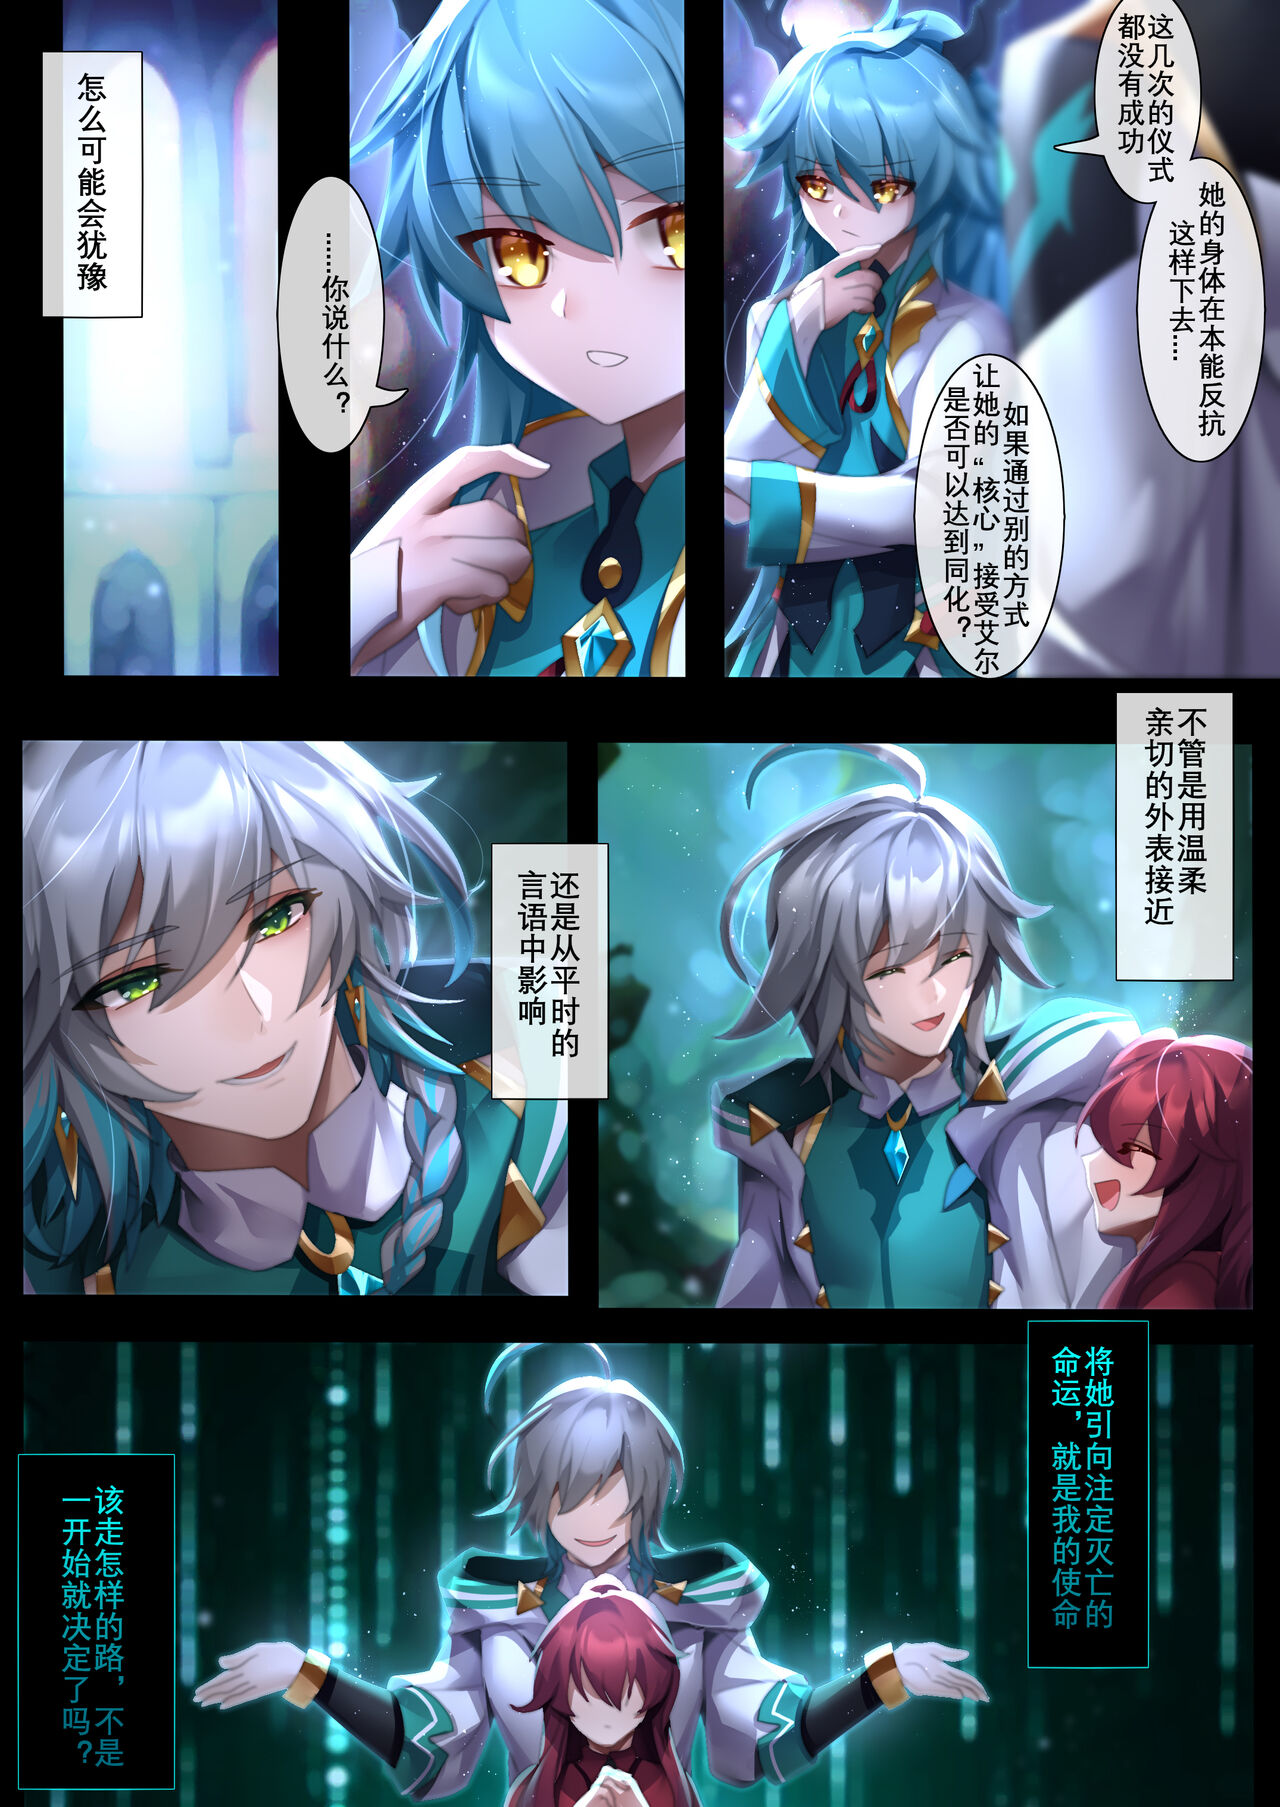 [Been] The illusion of lies(1) (Elsword) [Chinese] [Been] The illusion of lies（1） (エルソード) [中国語]